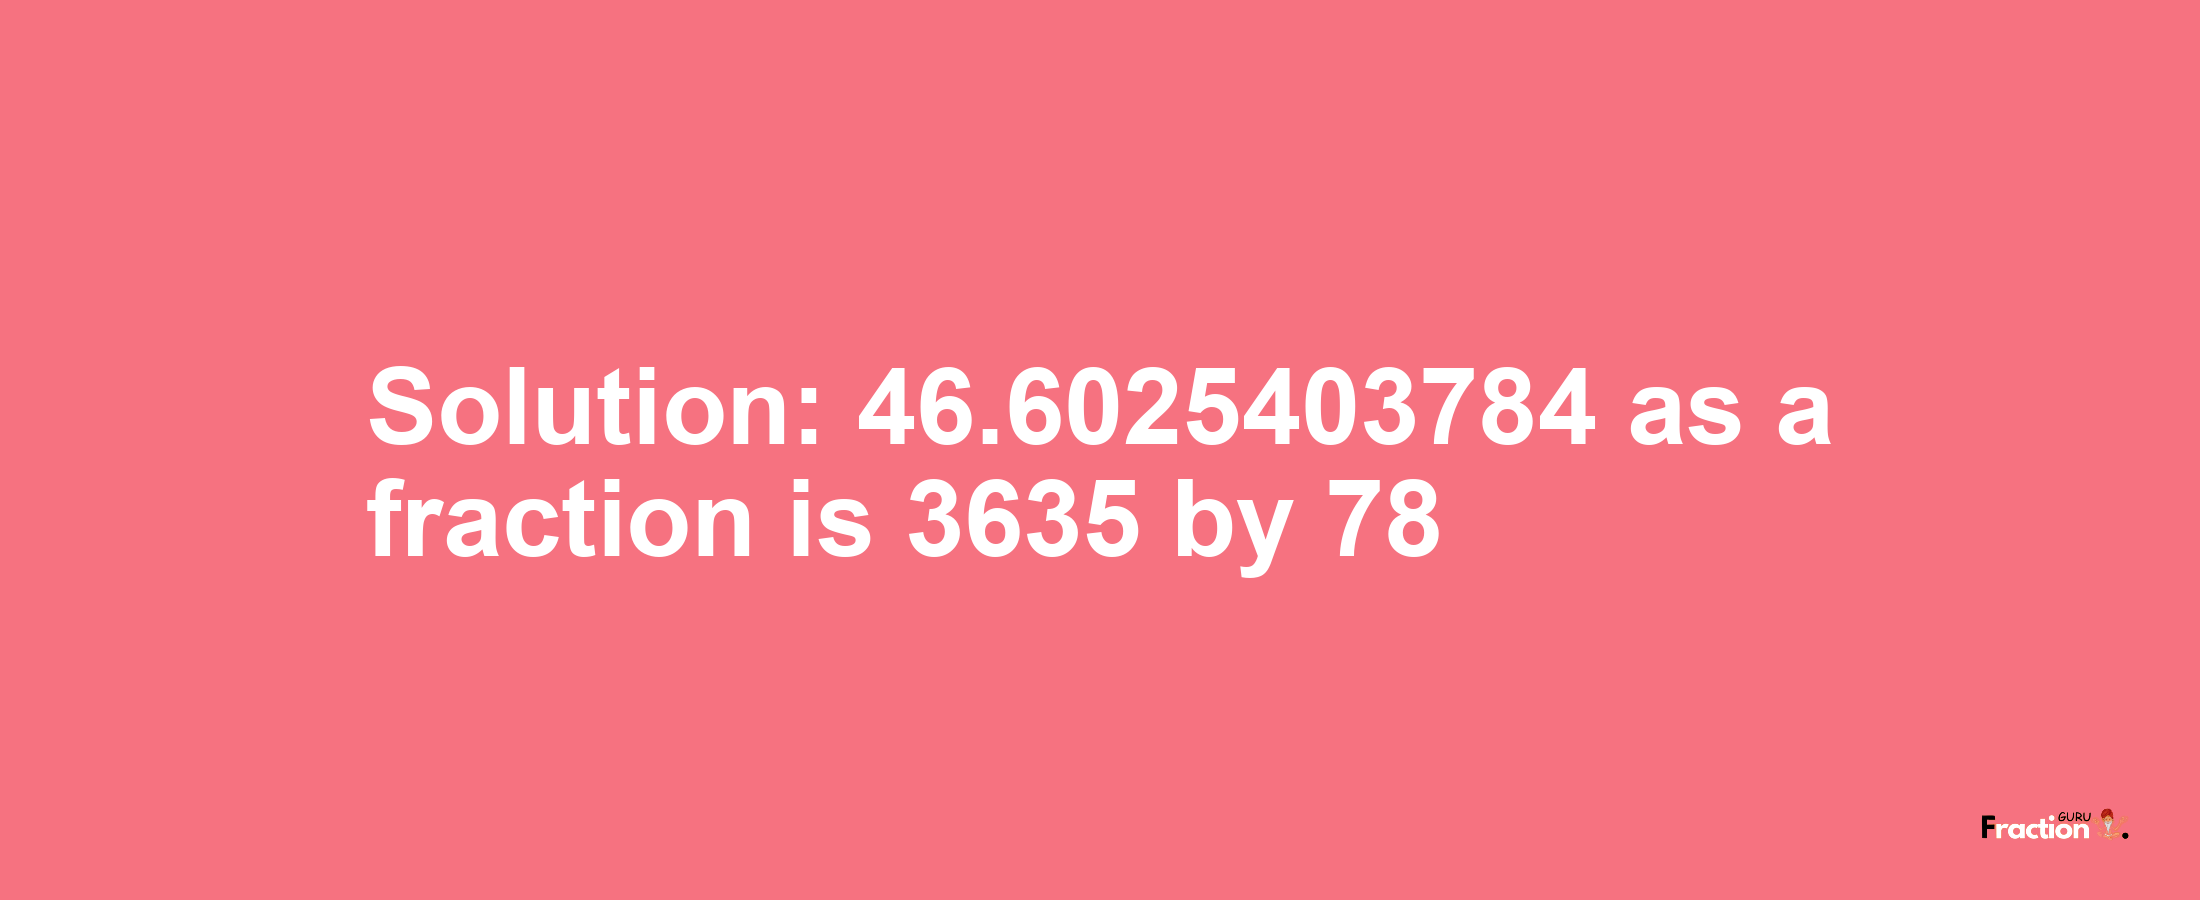 Solution:46.6025403784 as a fraction is 3635/78